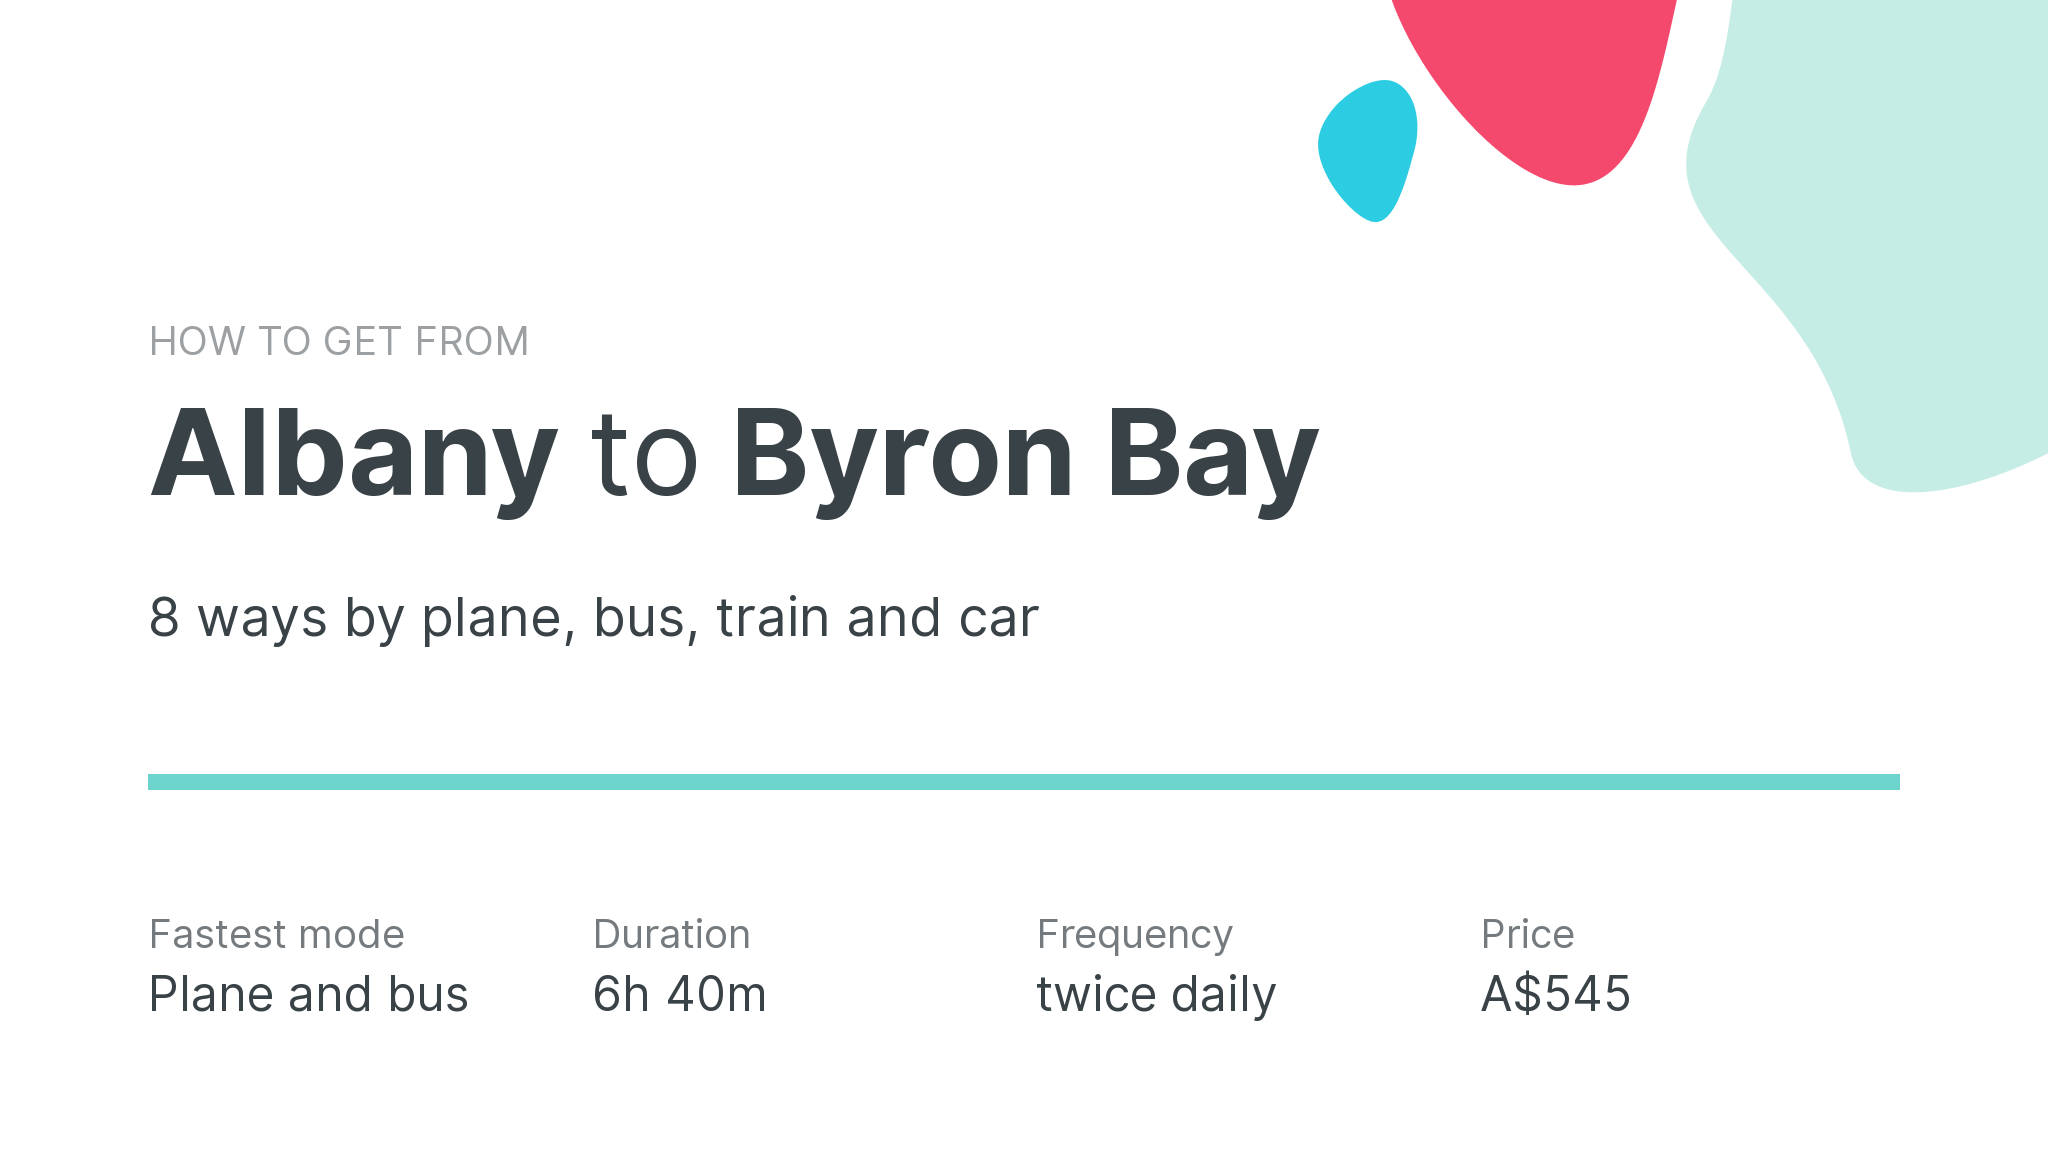 How do I get from Albany to Byron Bay